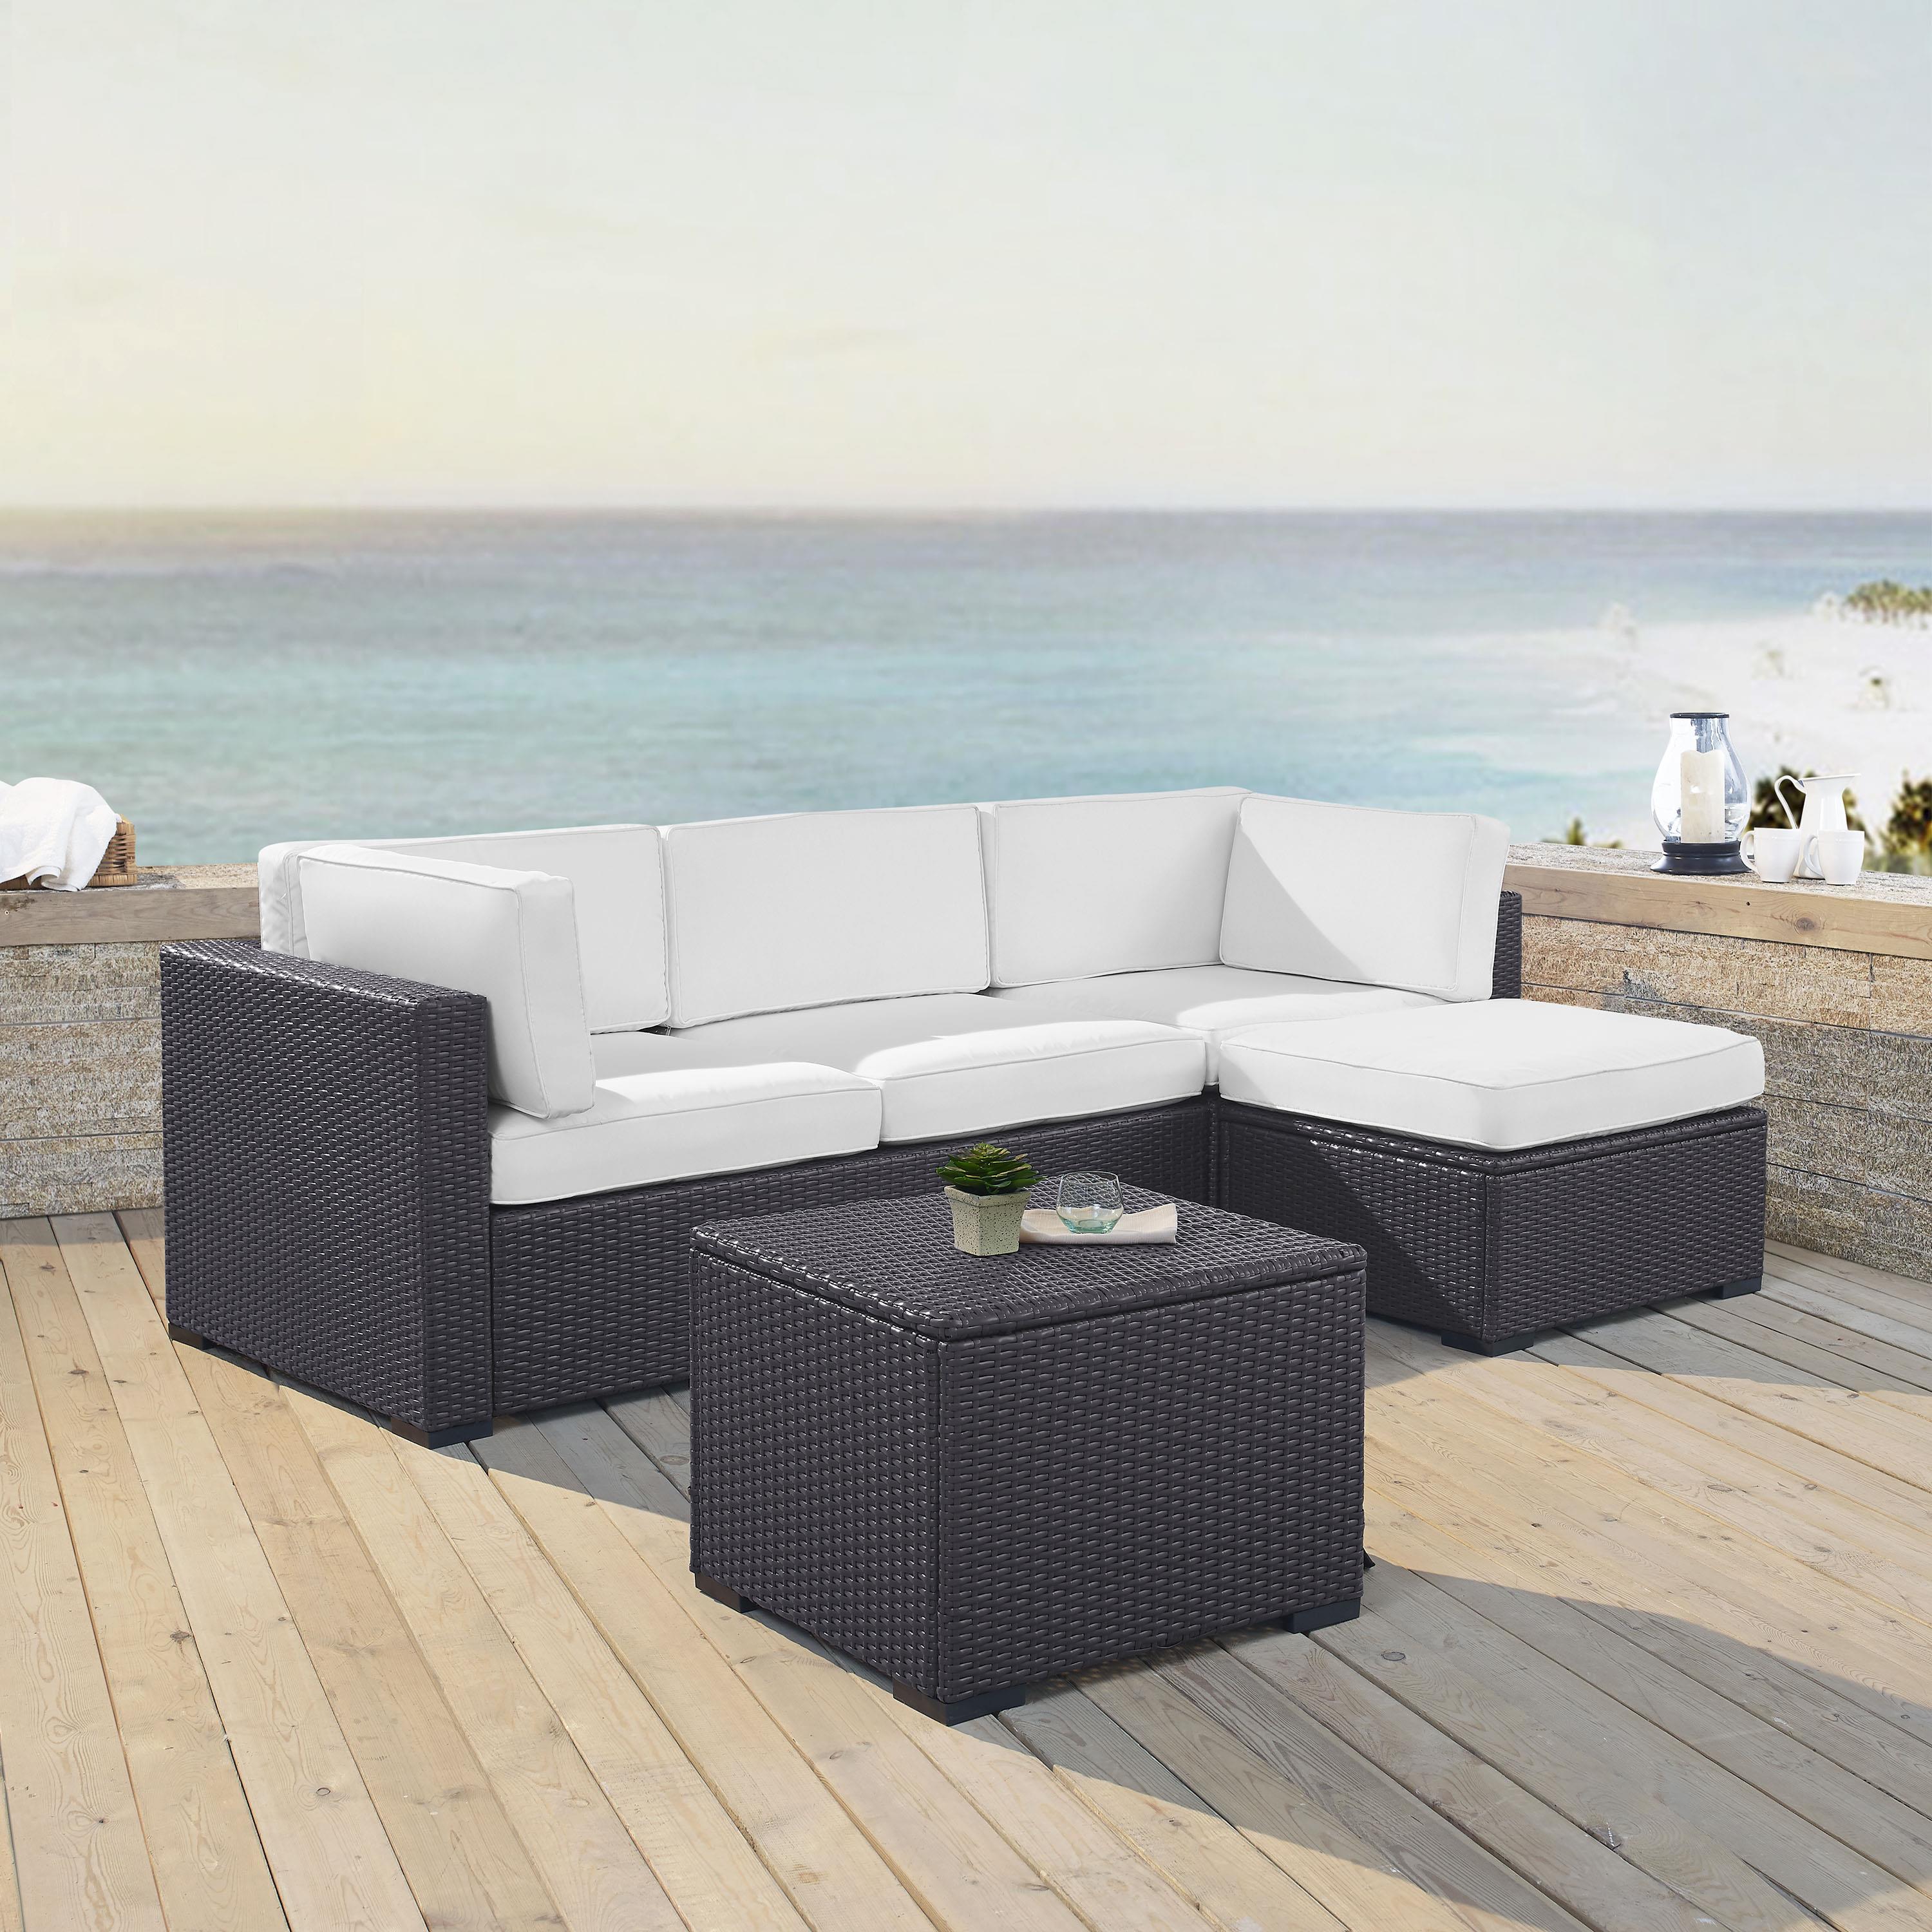 Crosley Furniture Biscayne 4 Piece Metal Patio Sectional Set in Brown/White - image 4 of 4